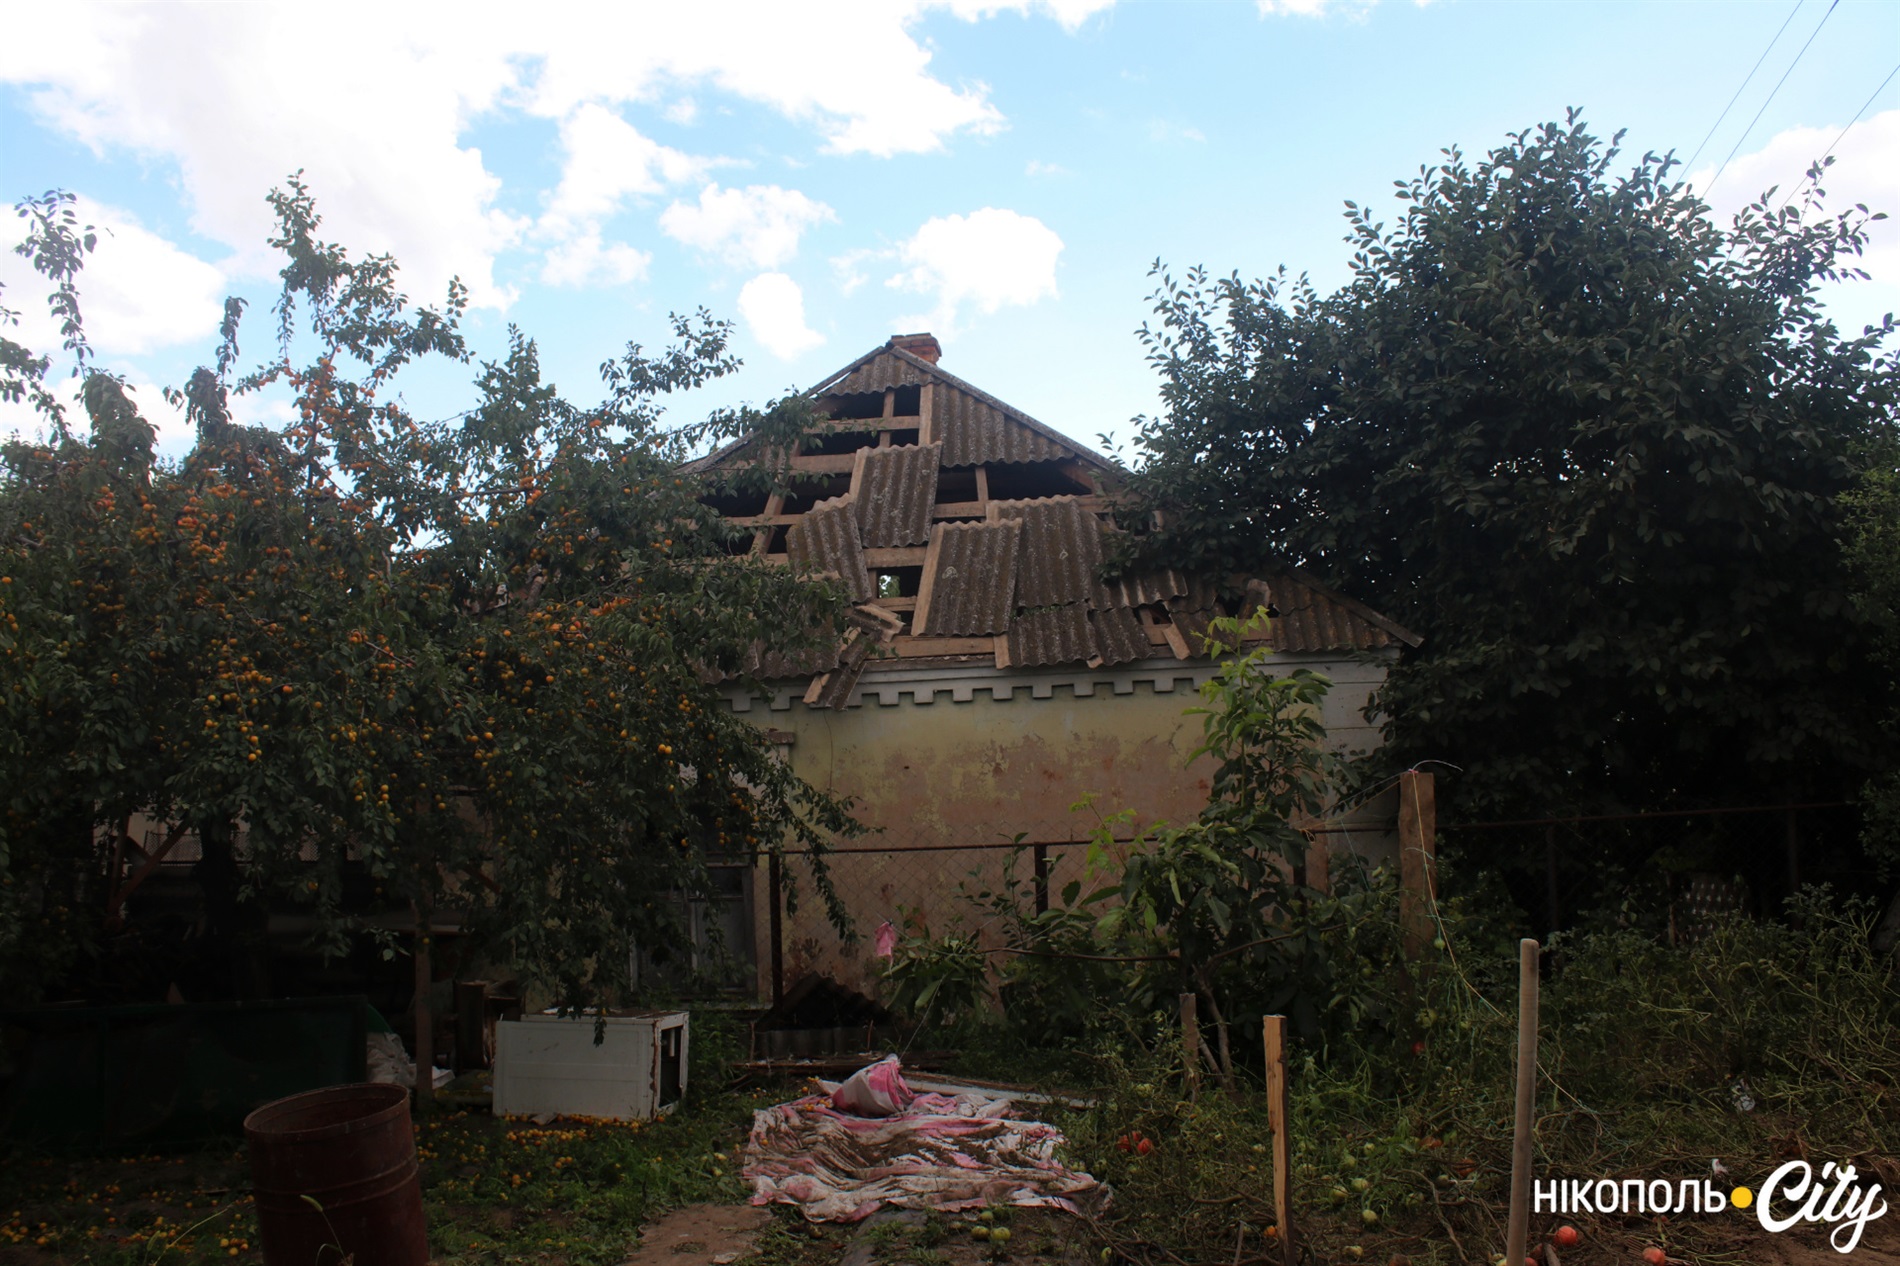 Consequences of shelling of private residential buildings in Nikopol 